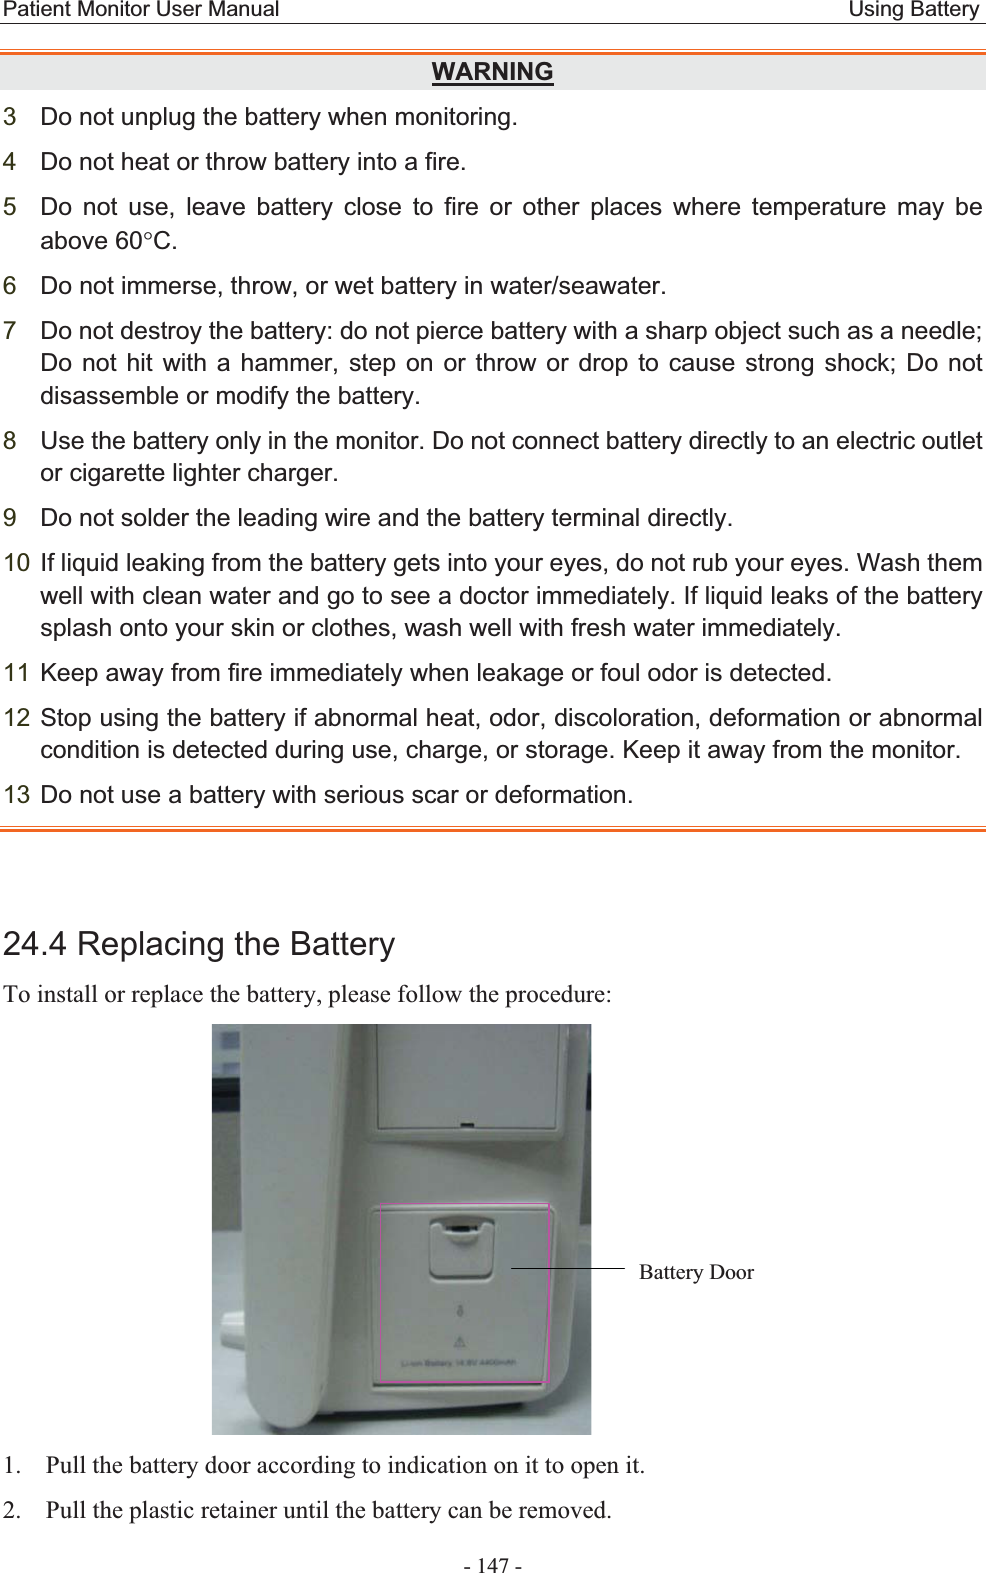 Patient Monitor User Manual                                                    Using Battery  - 147 - WARNING3Do not unplug the battery when monitoring. 4Do not heat or throw battery into a fire. 5Do not use, leave battery close to fire or other places where temperature may be above 60qC.6Do not immerse, throw, or wet battery in water/seawater. 7Do not destroy the battery: do not pierce battery with a sharp object such as a needle; Do not hit with a hammer, step on or throw or drop to cause strong shock; Do not disassemble or modify the battery. 8Use the battery only in the monitor. Do not connect battery directly to an electric outlet or cigarette lighter charger. 9Do not solder the leading wire and the battery terminal directly. 10 If liquid leaking from the battery gets into your eyes, do not rub your eyes. Wash them well with clean water and go to see a doctor immediately. If liquid leaks of the battery splash onto your skin or clothes, wash well with fresh water immediately. 11 Keep away from fire immediately when leakage or foul odor is detected. 12 Stop using the battery if abnormal heat, odor, discoloration, deformation or abnormal condition is detected during use, charge, or storage. Keep it away from the monitor. 13 Do not use a battery with serious scar or deformation. 24.4 Replacing the Battery To install or replace the battery, please follow the procedure:  1. Pull the battery door according to indication on it to open it. 2. Pull the plastic retainer until the battery can be removed. Battery Door 